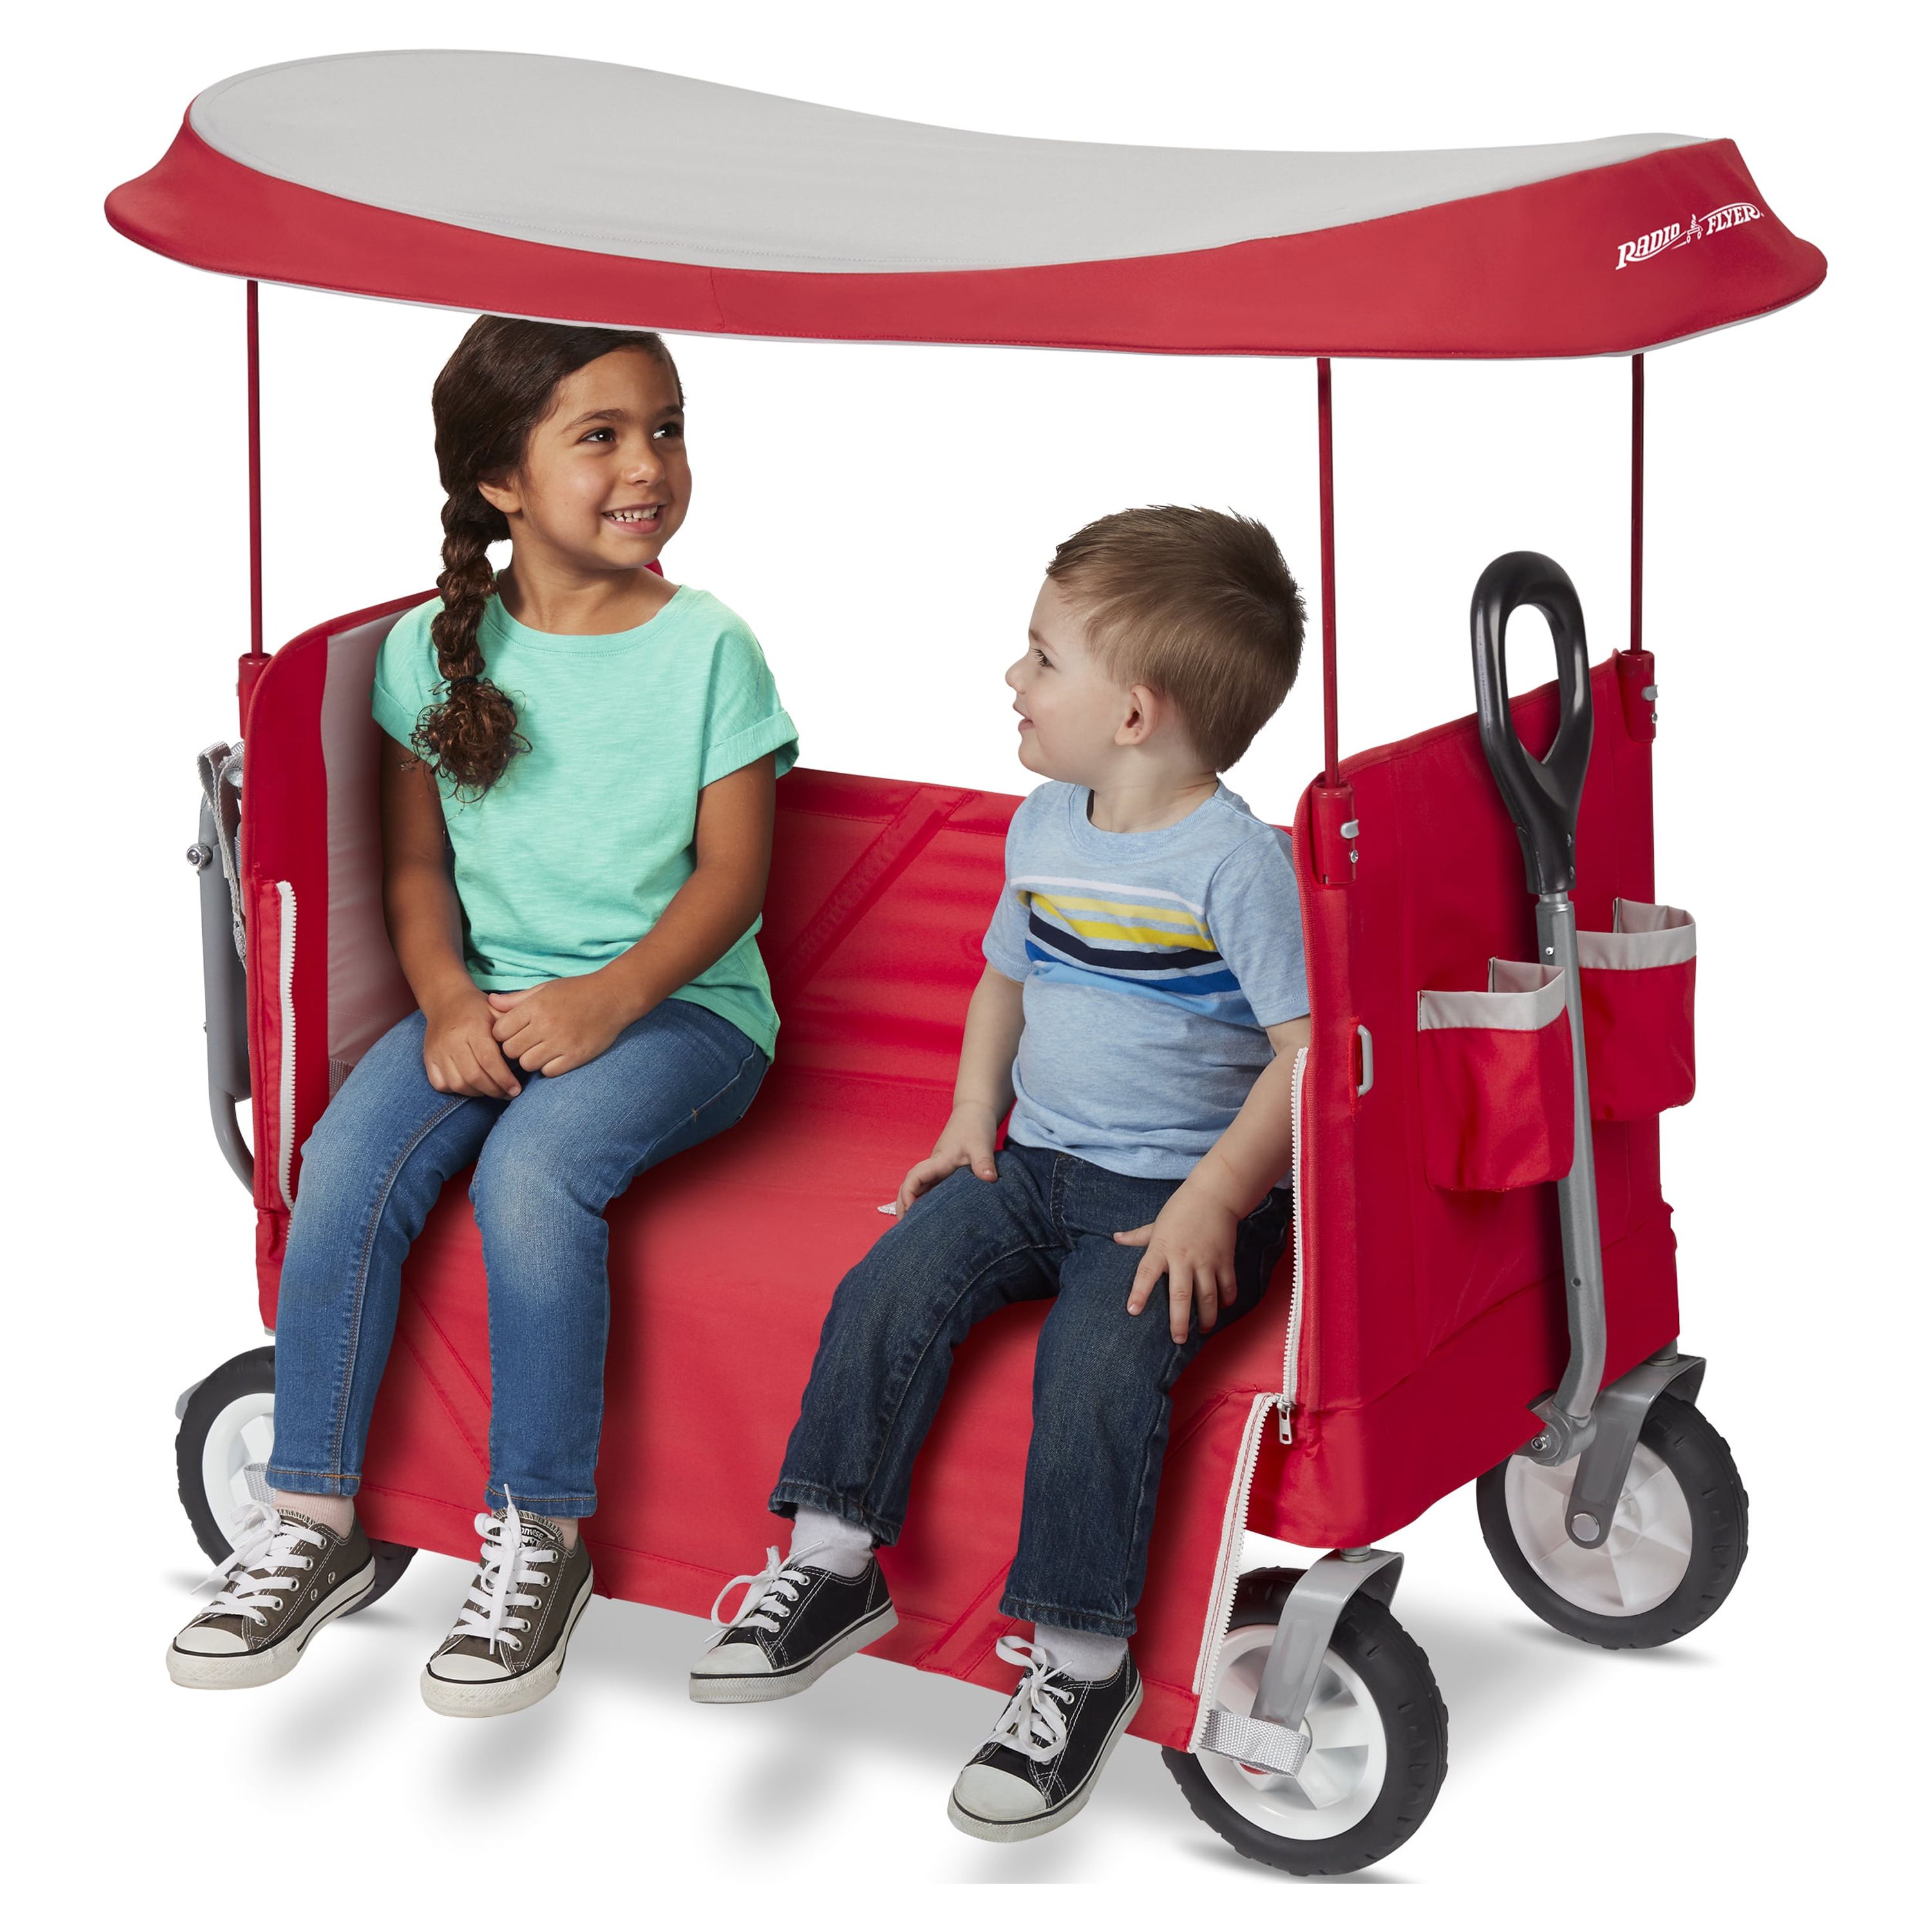 Radio Flyer, 3-in-1 Tailgater Wagon with Canopy, Folding Wagon, Red - image 4 of 20